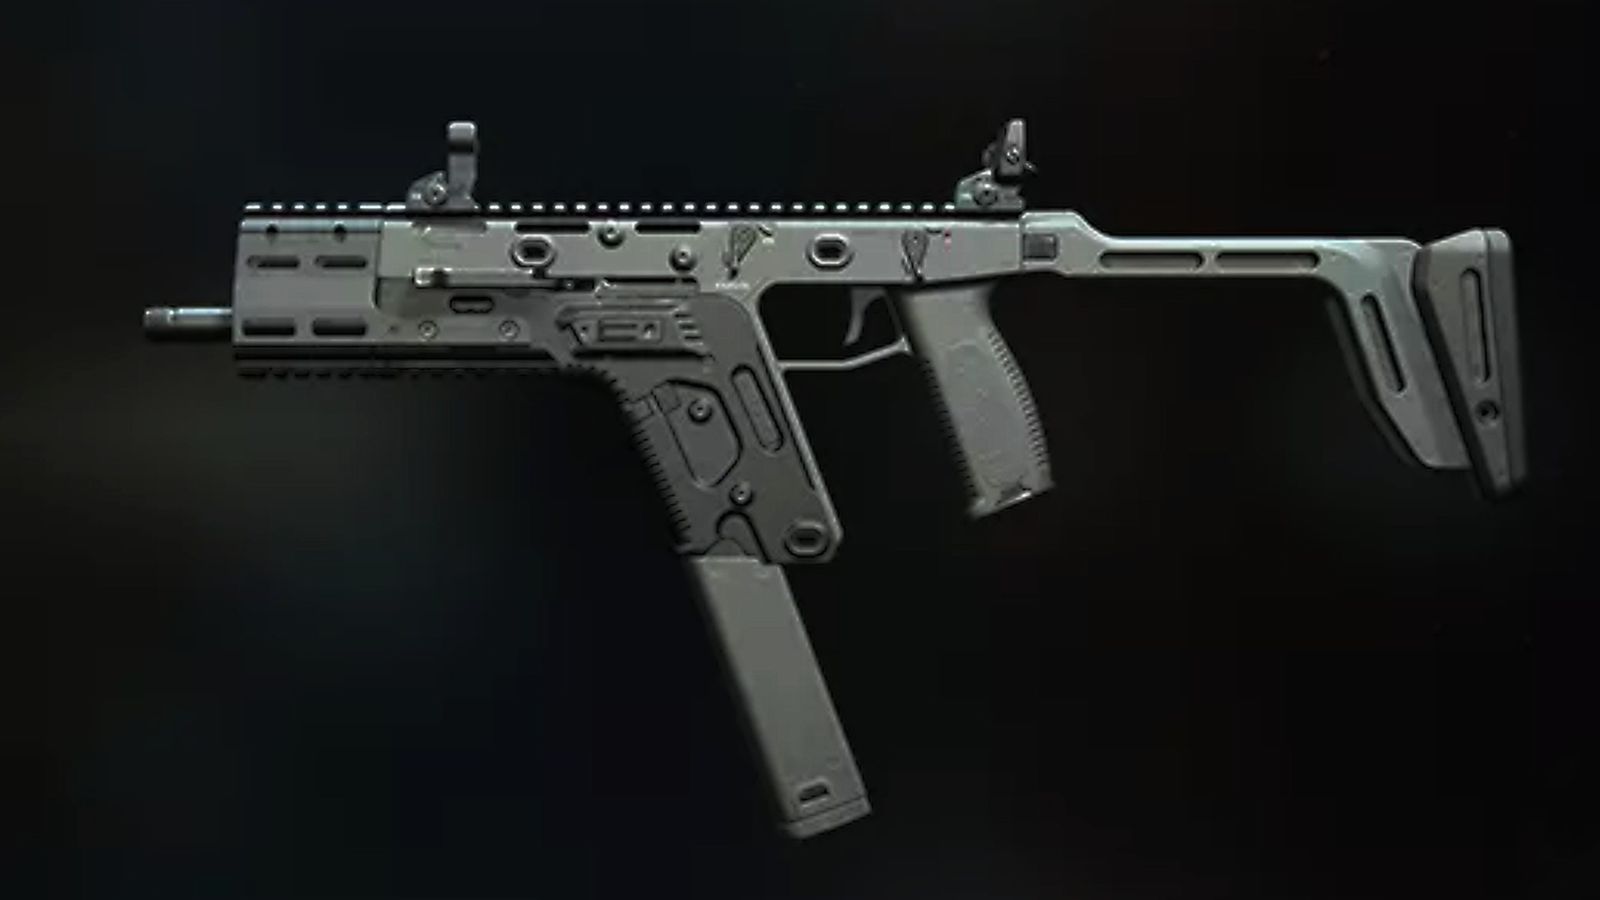 Modern Warfare 3 - Fennec 45 SMG in front of a black background